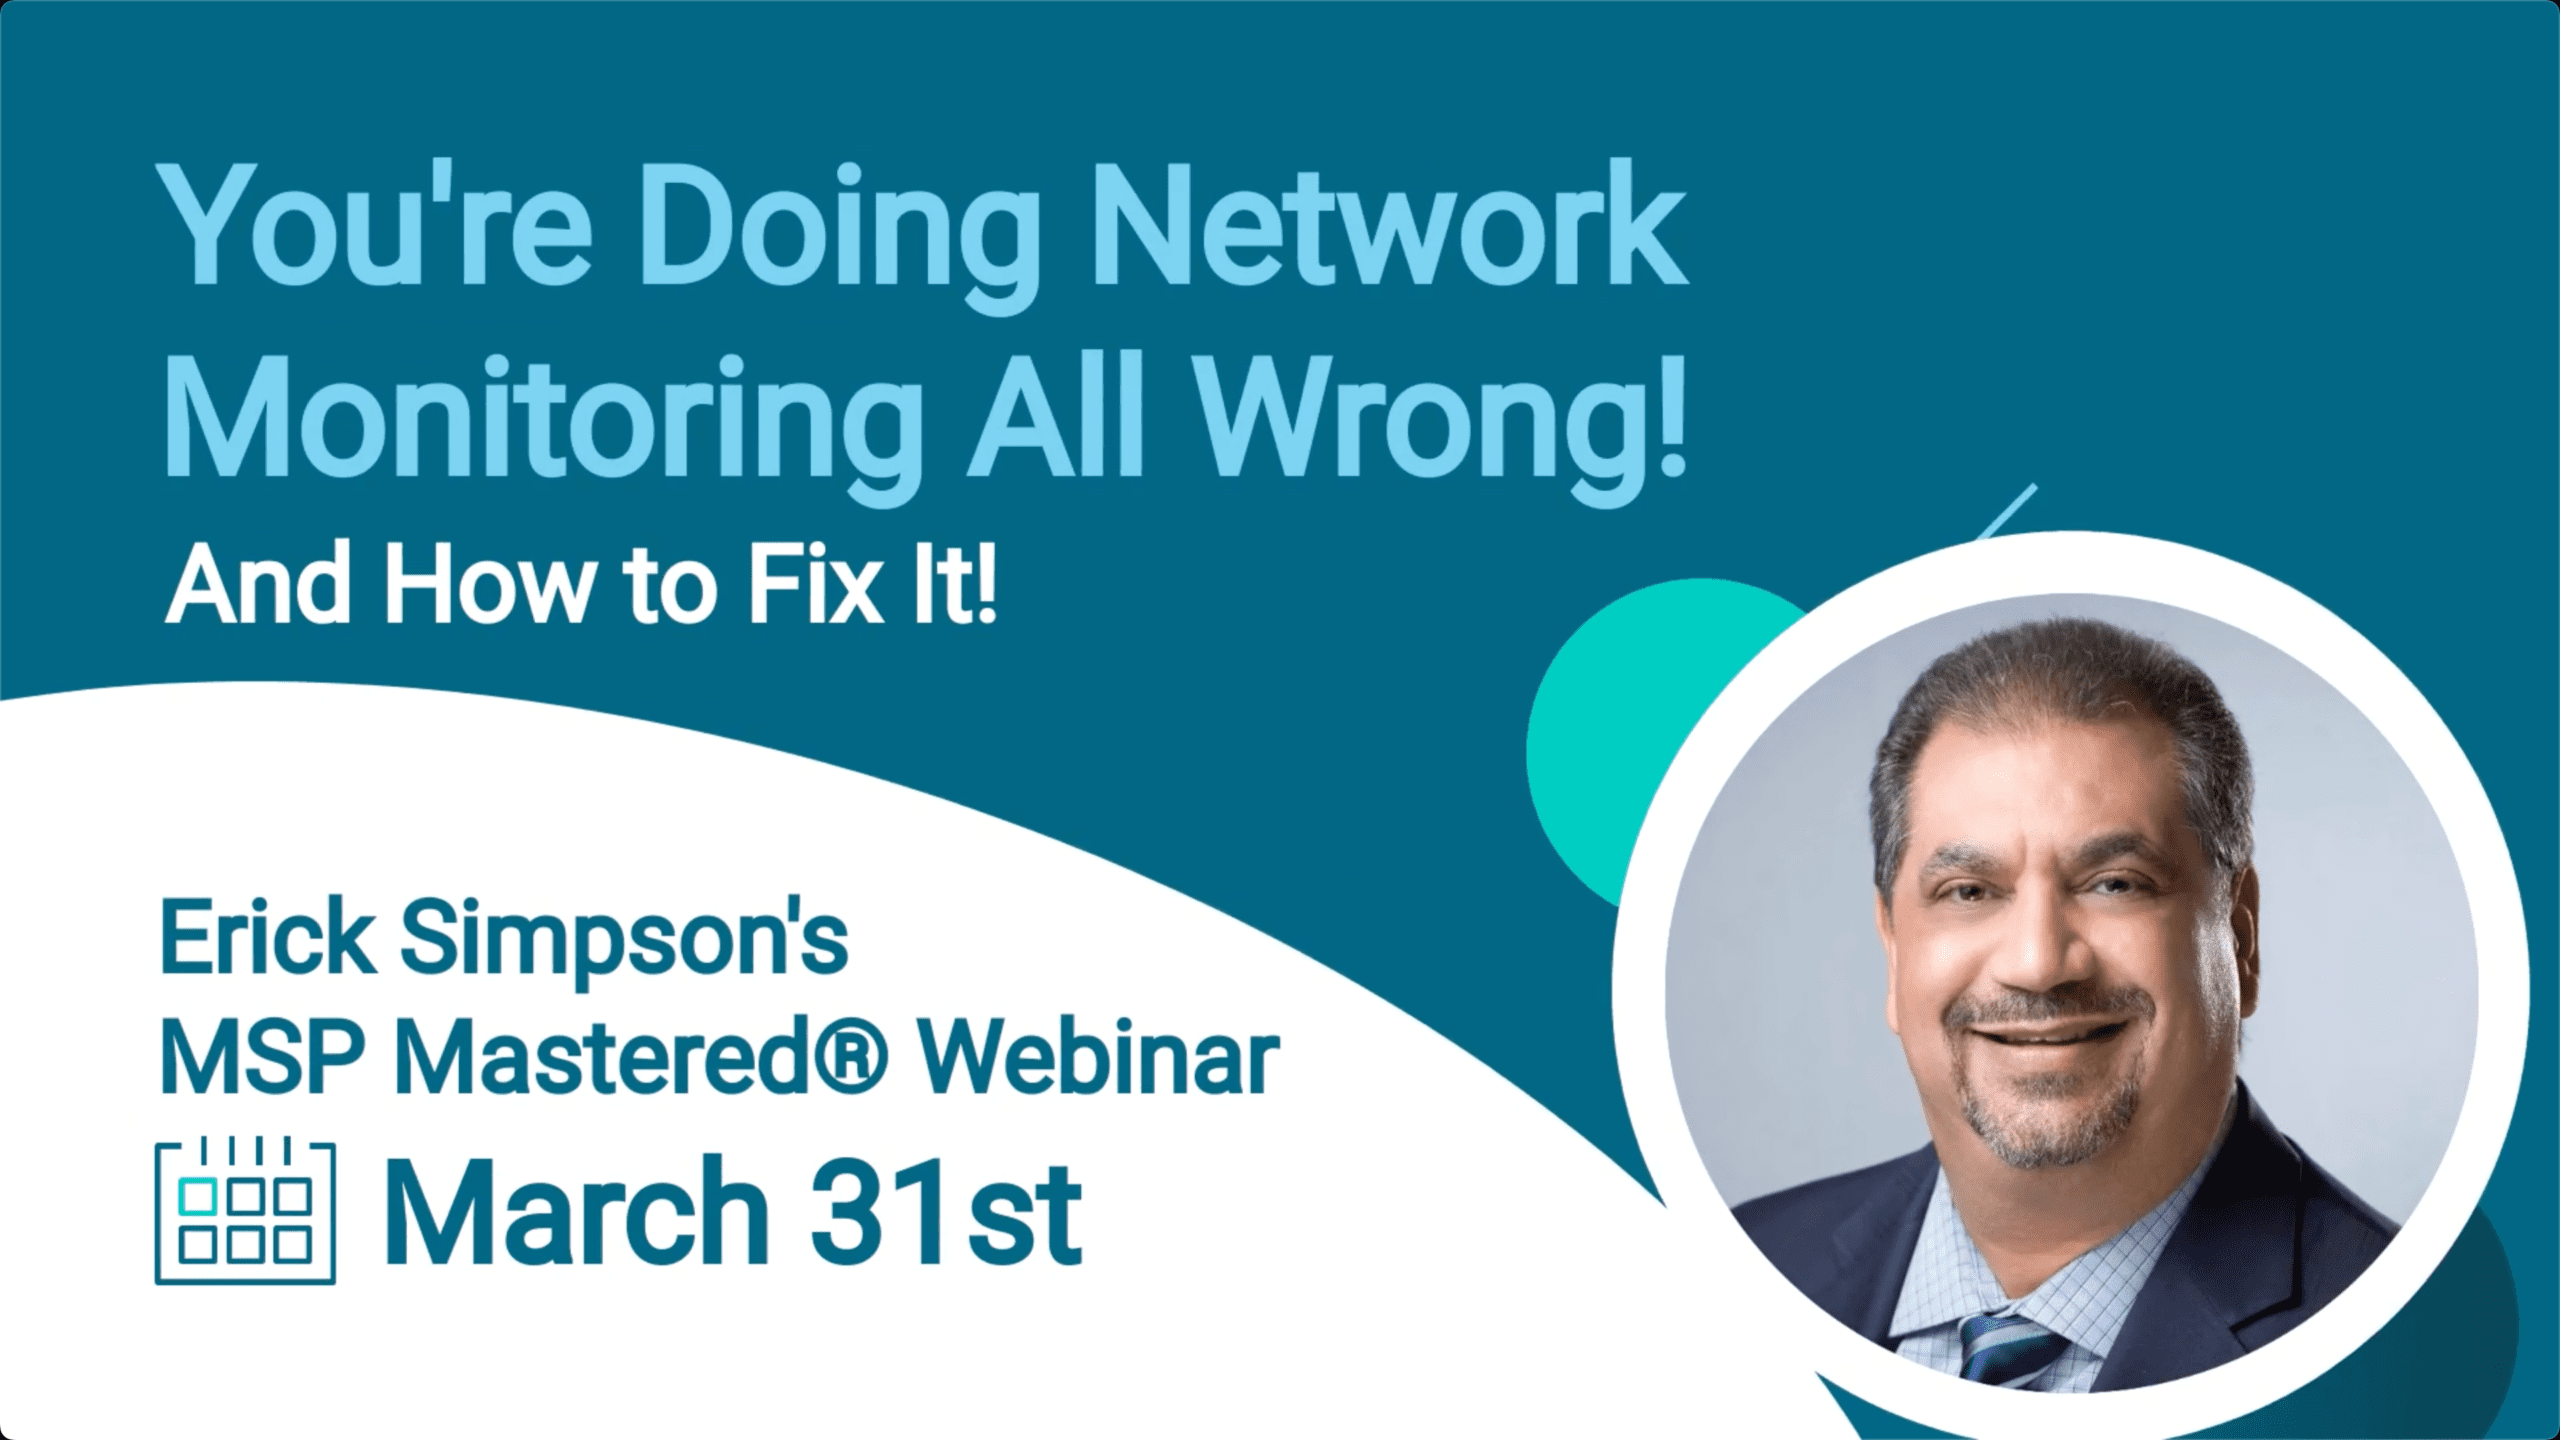 You're Doing Network Monitoring All Wrong